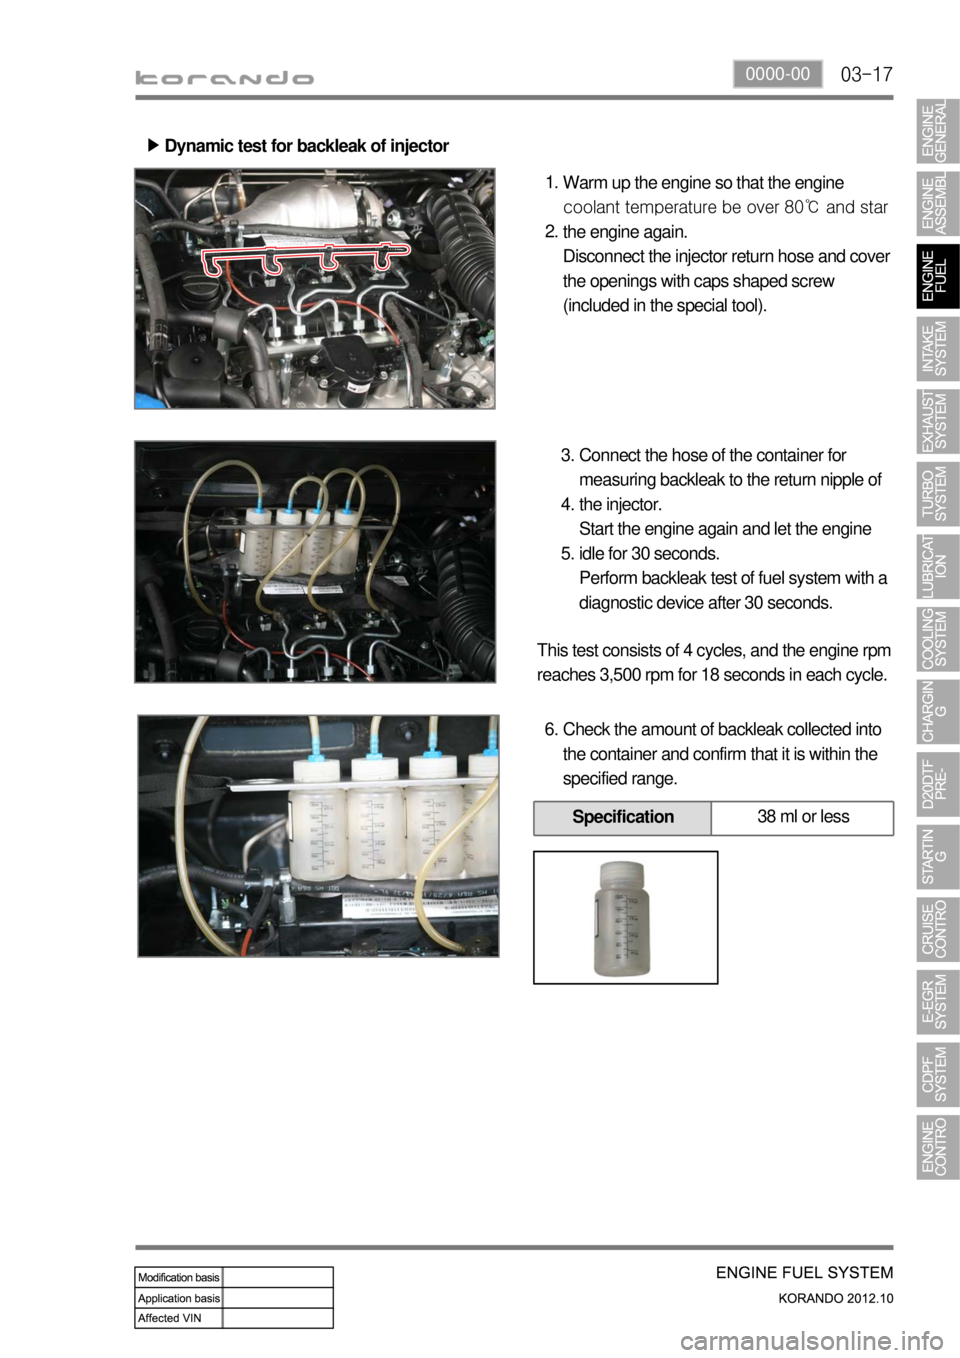 SSANGYONG KORANDO 2012  Service Manual 03-170000-00
Dynamic test for backleak of injector ▶
Warm up the engine so that the engine 
coolant temperature be over 80℃ and star 
the engine again.
Disconnect the injector return hose and cove